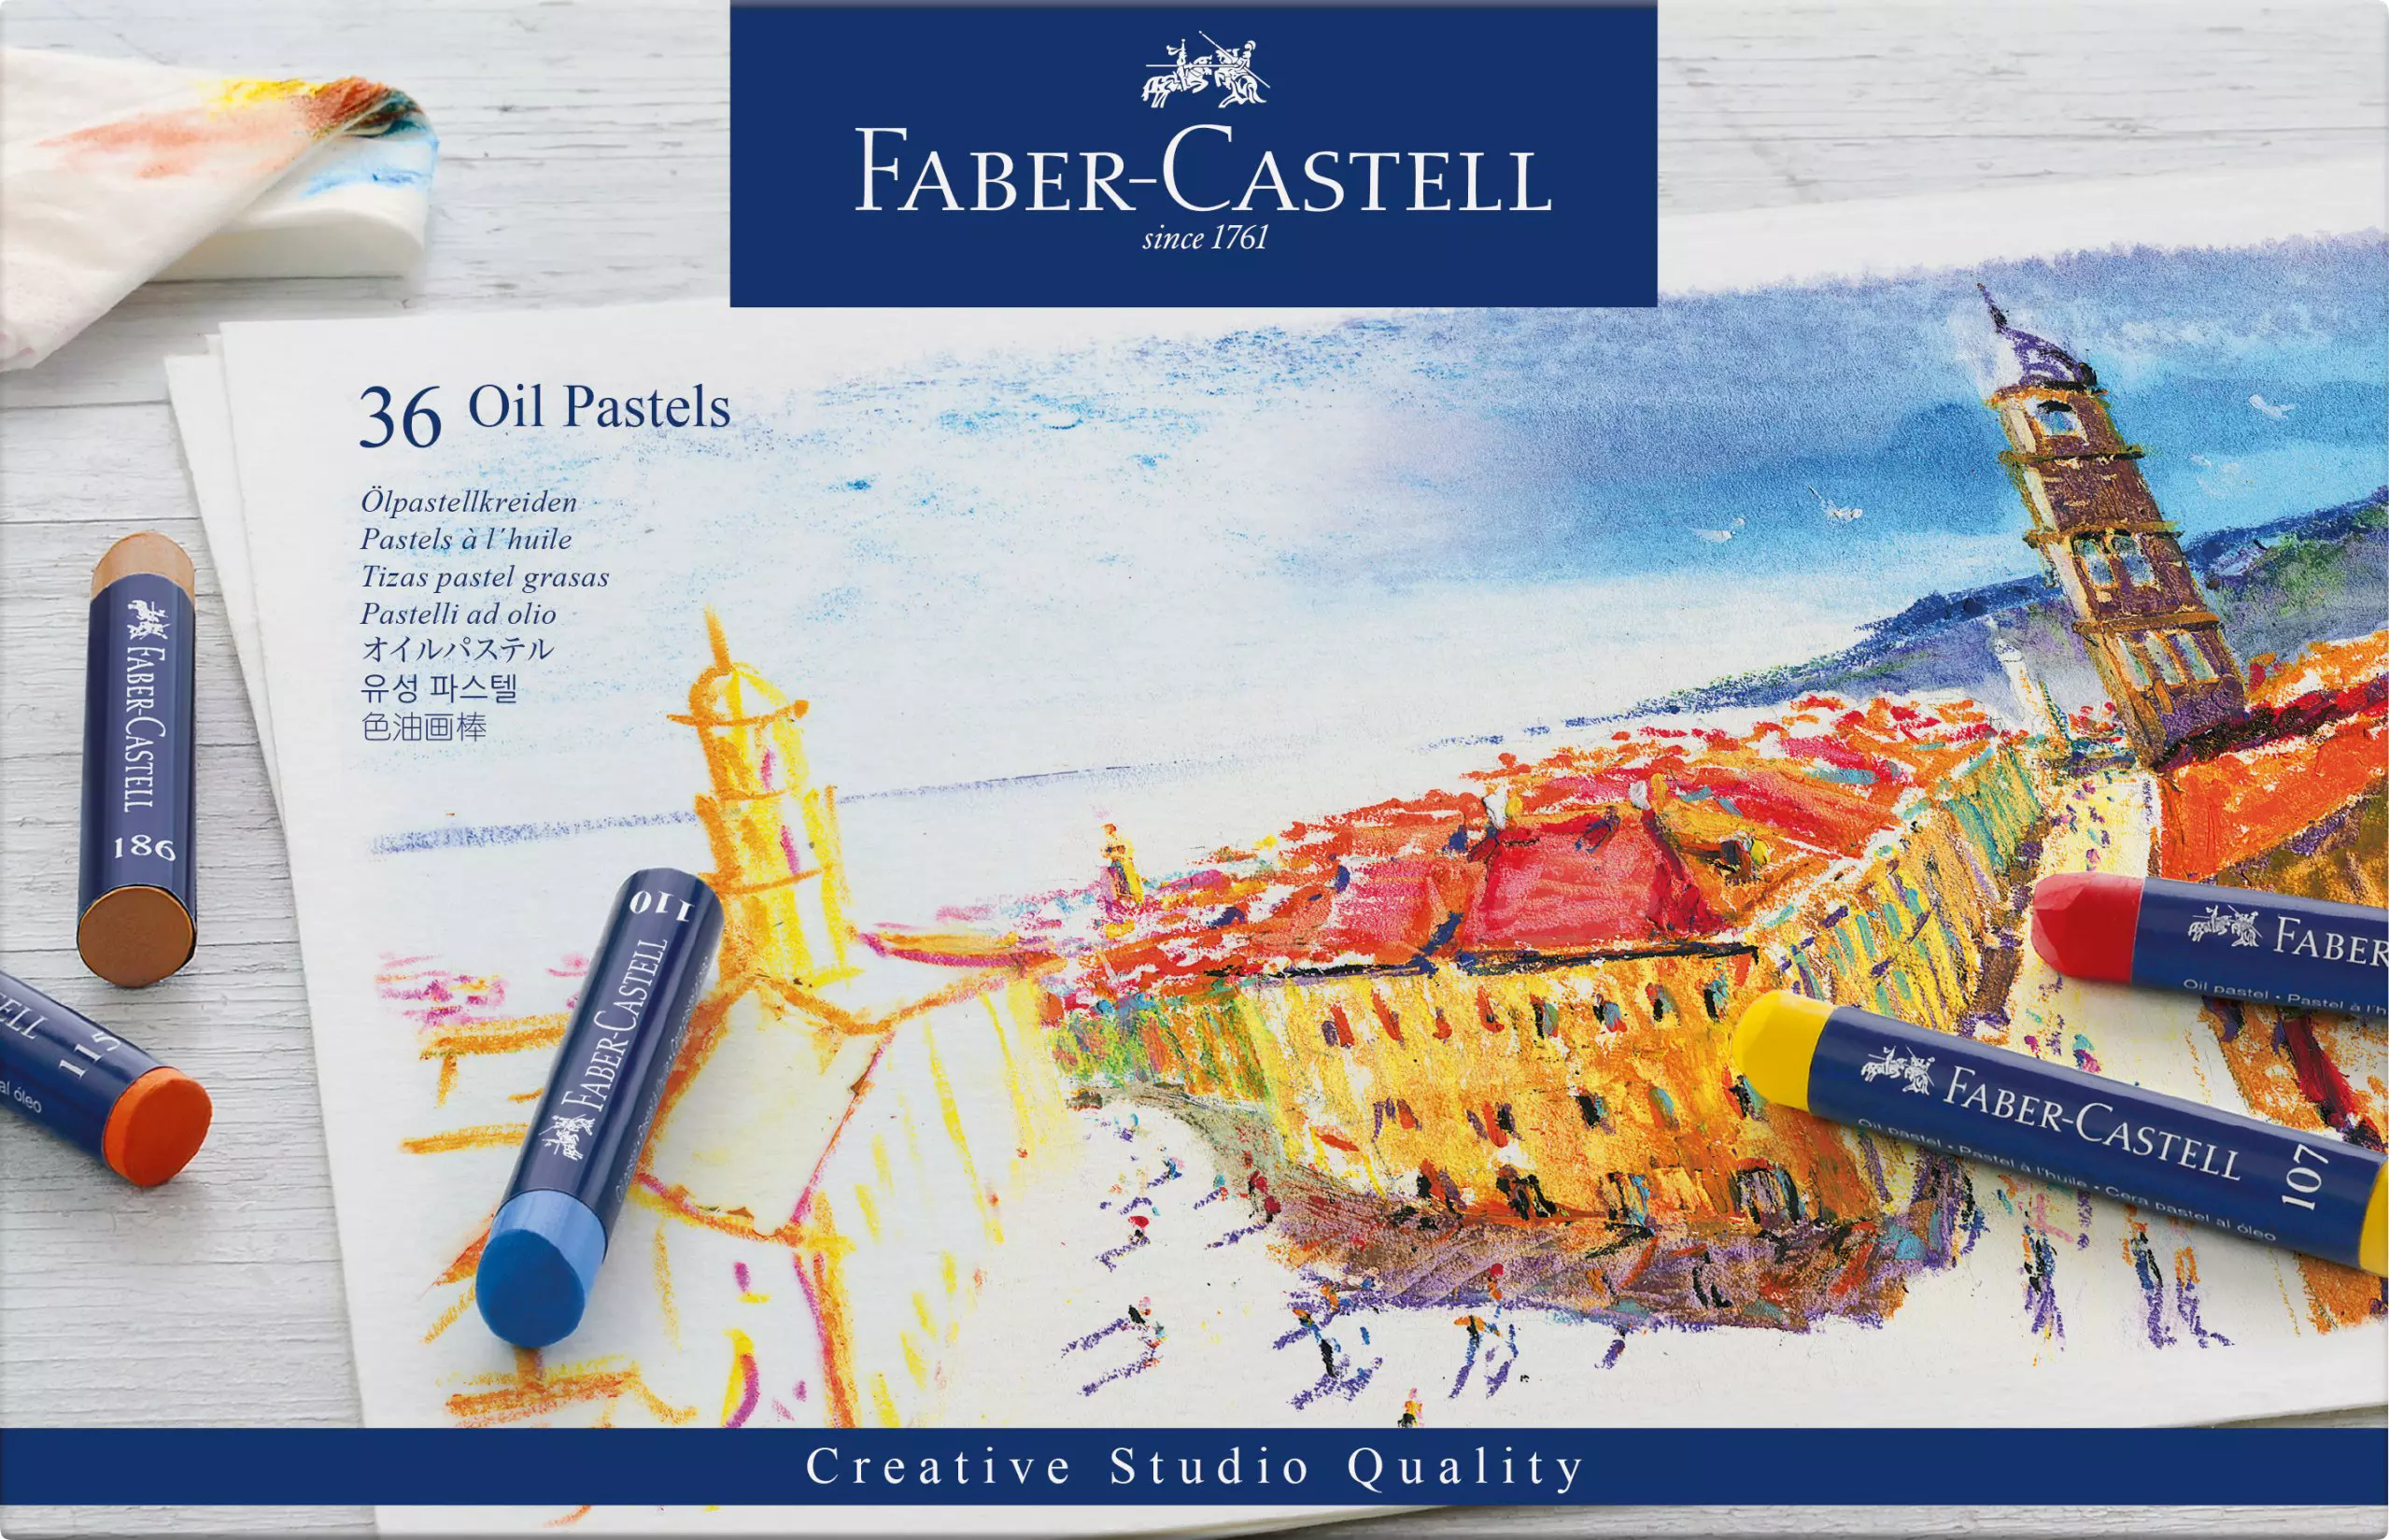 Faber-Castell Oil Pastel Crayons Studio Quality